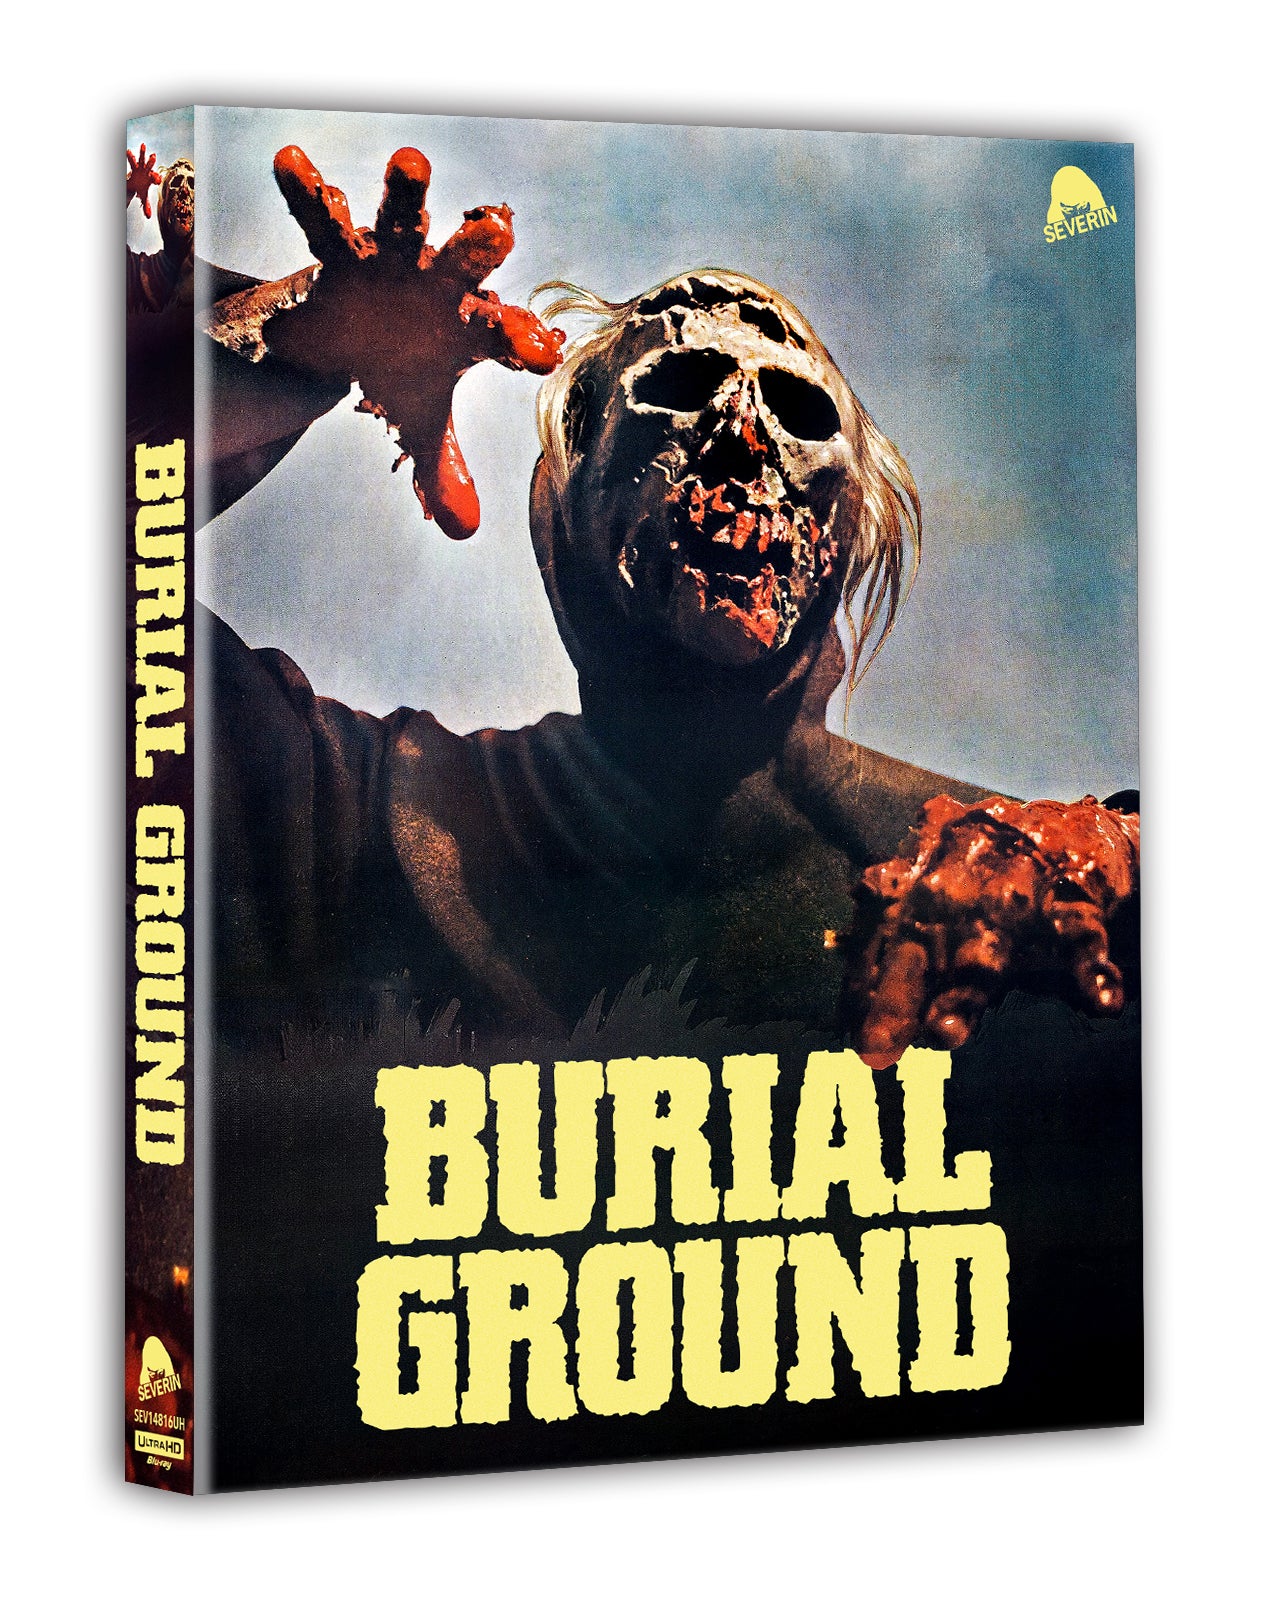 Burial Ground 4K UHD with Slipcover (Severin Films) [Preorder]